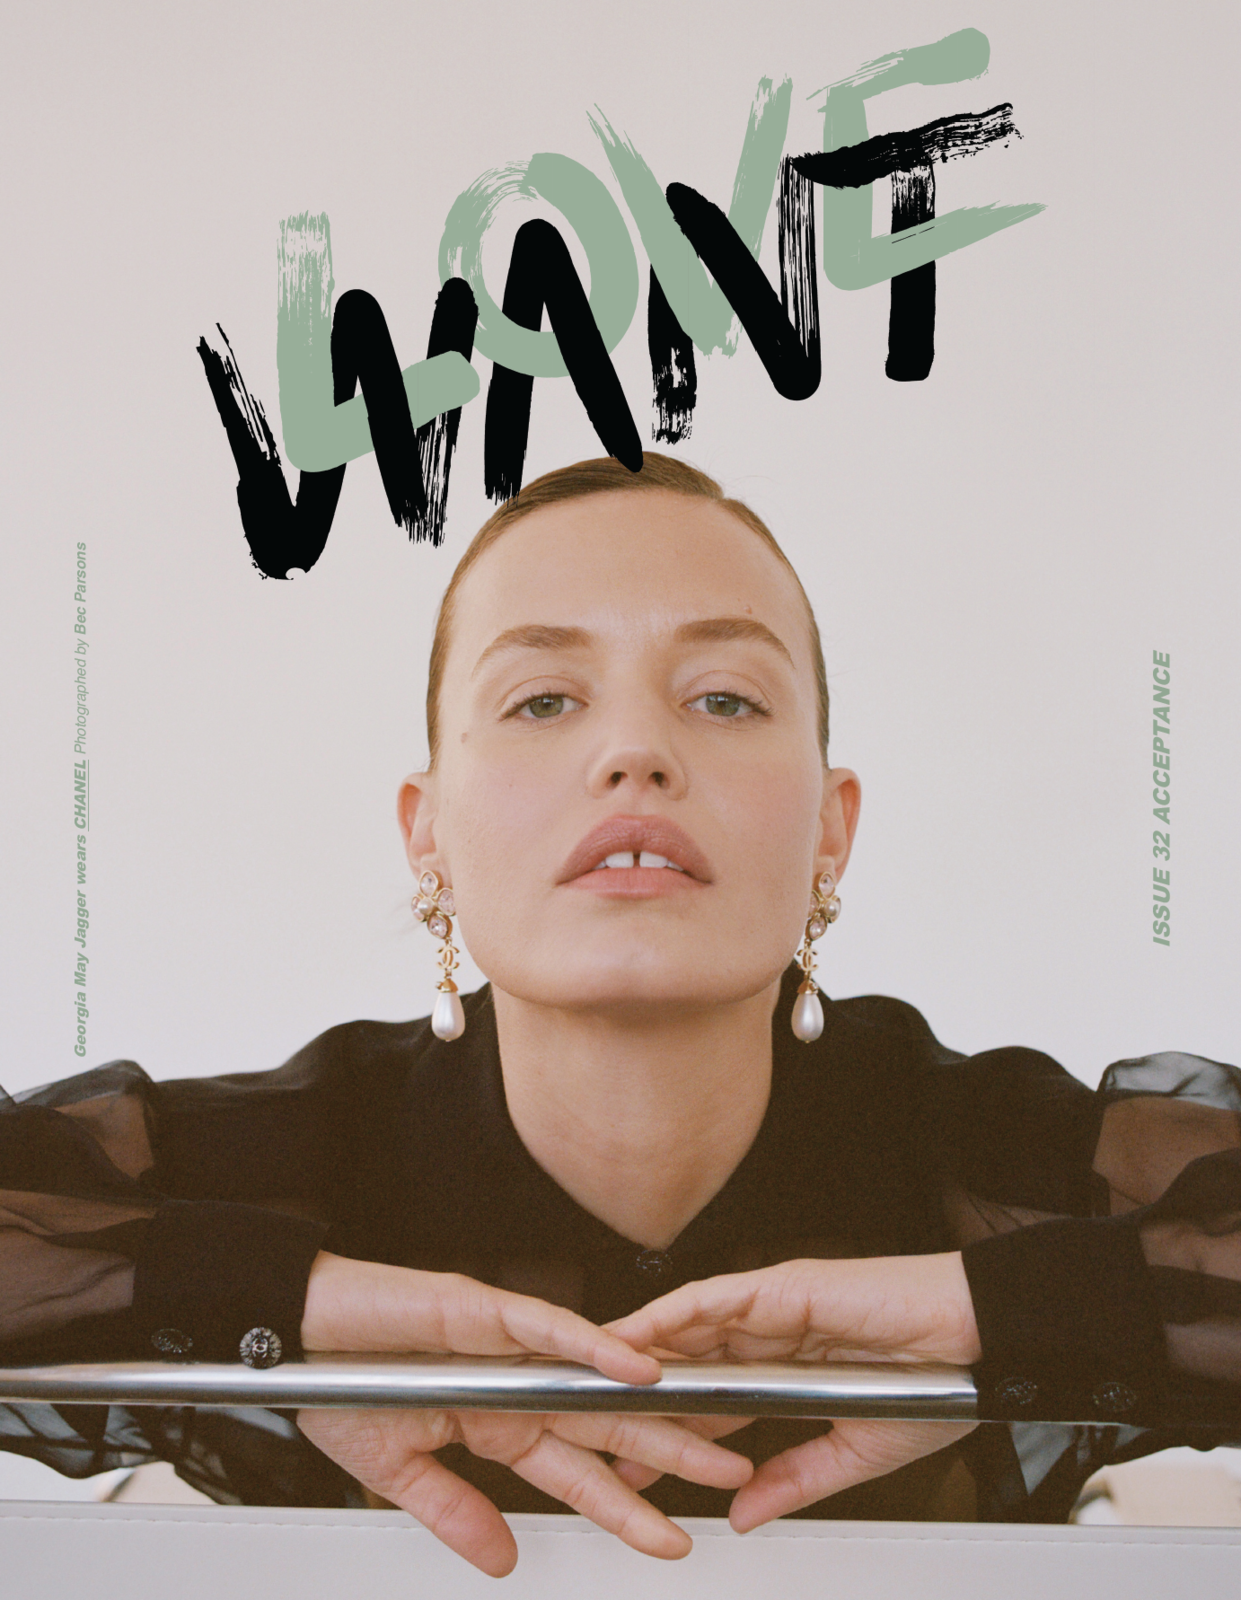 ISSUE 32 | GEORGIA MAY JAGGER - LOVE WANT